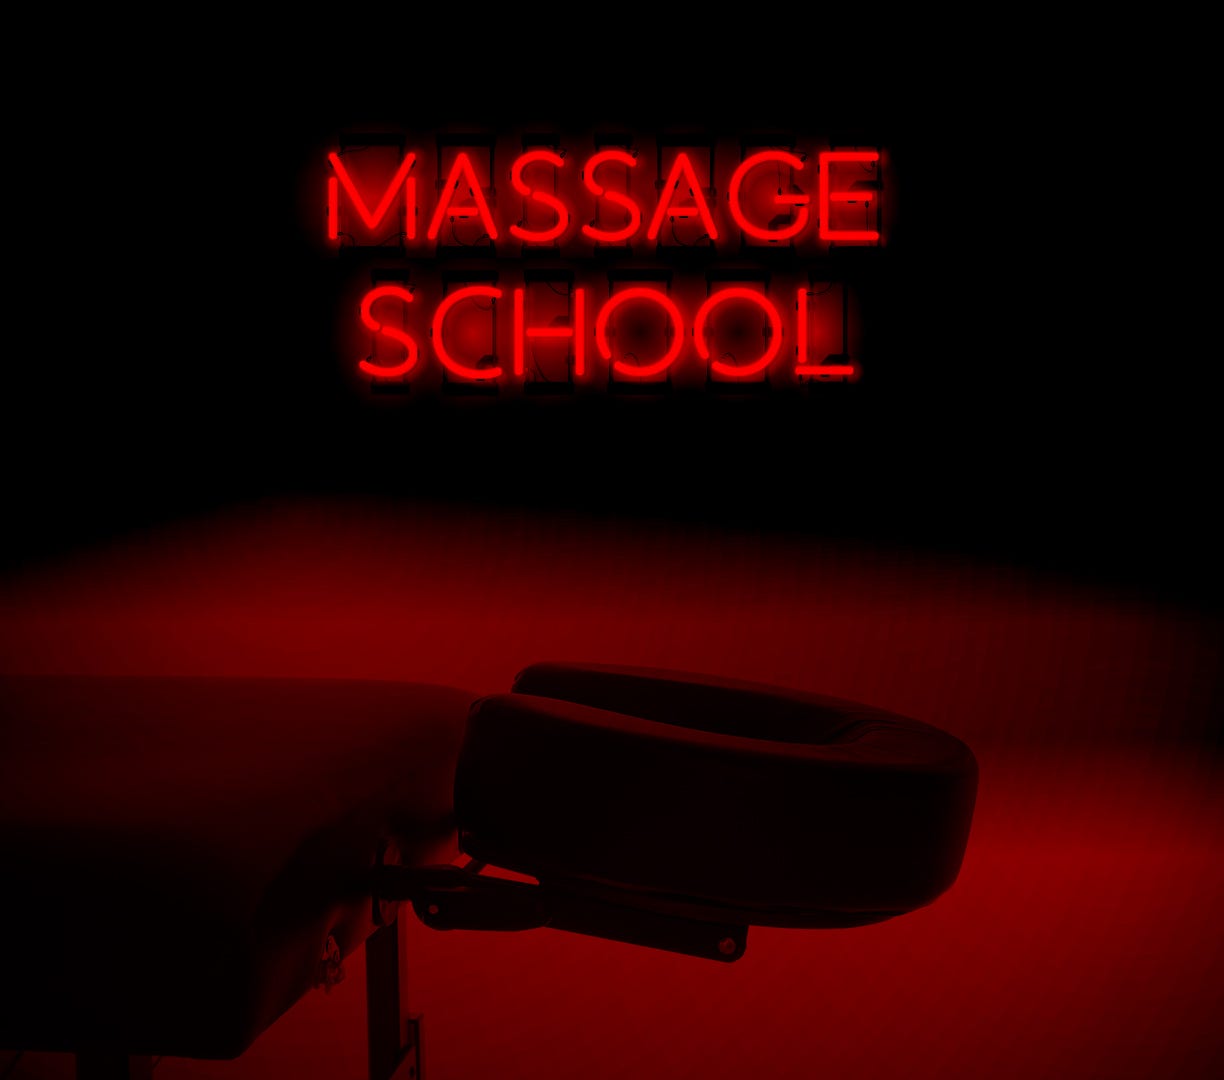 Massage schools linked to prostitution, fraud remain open across US photo